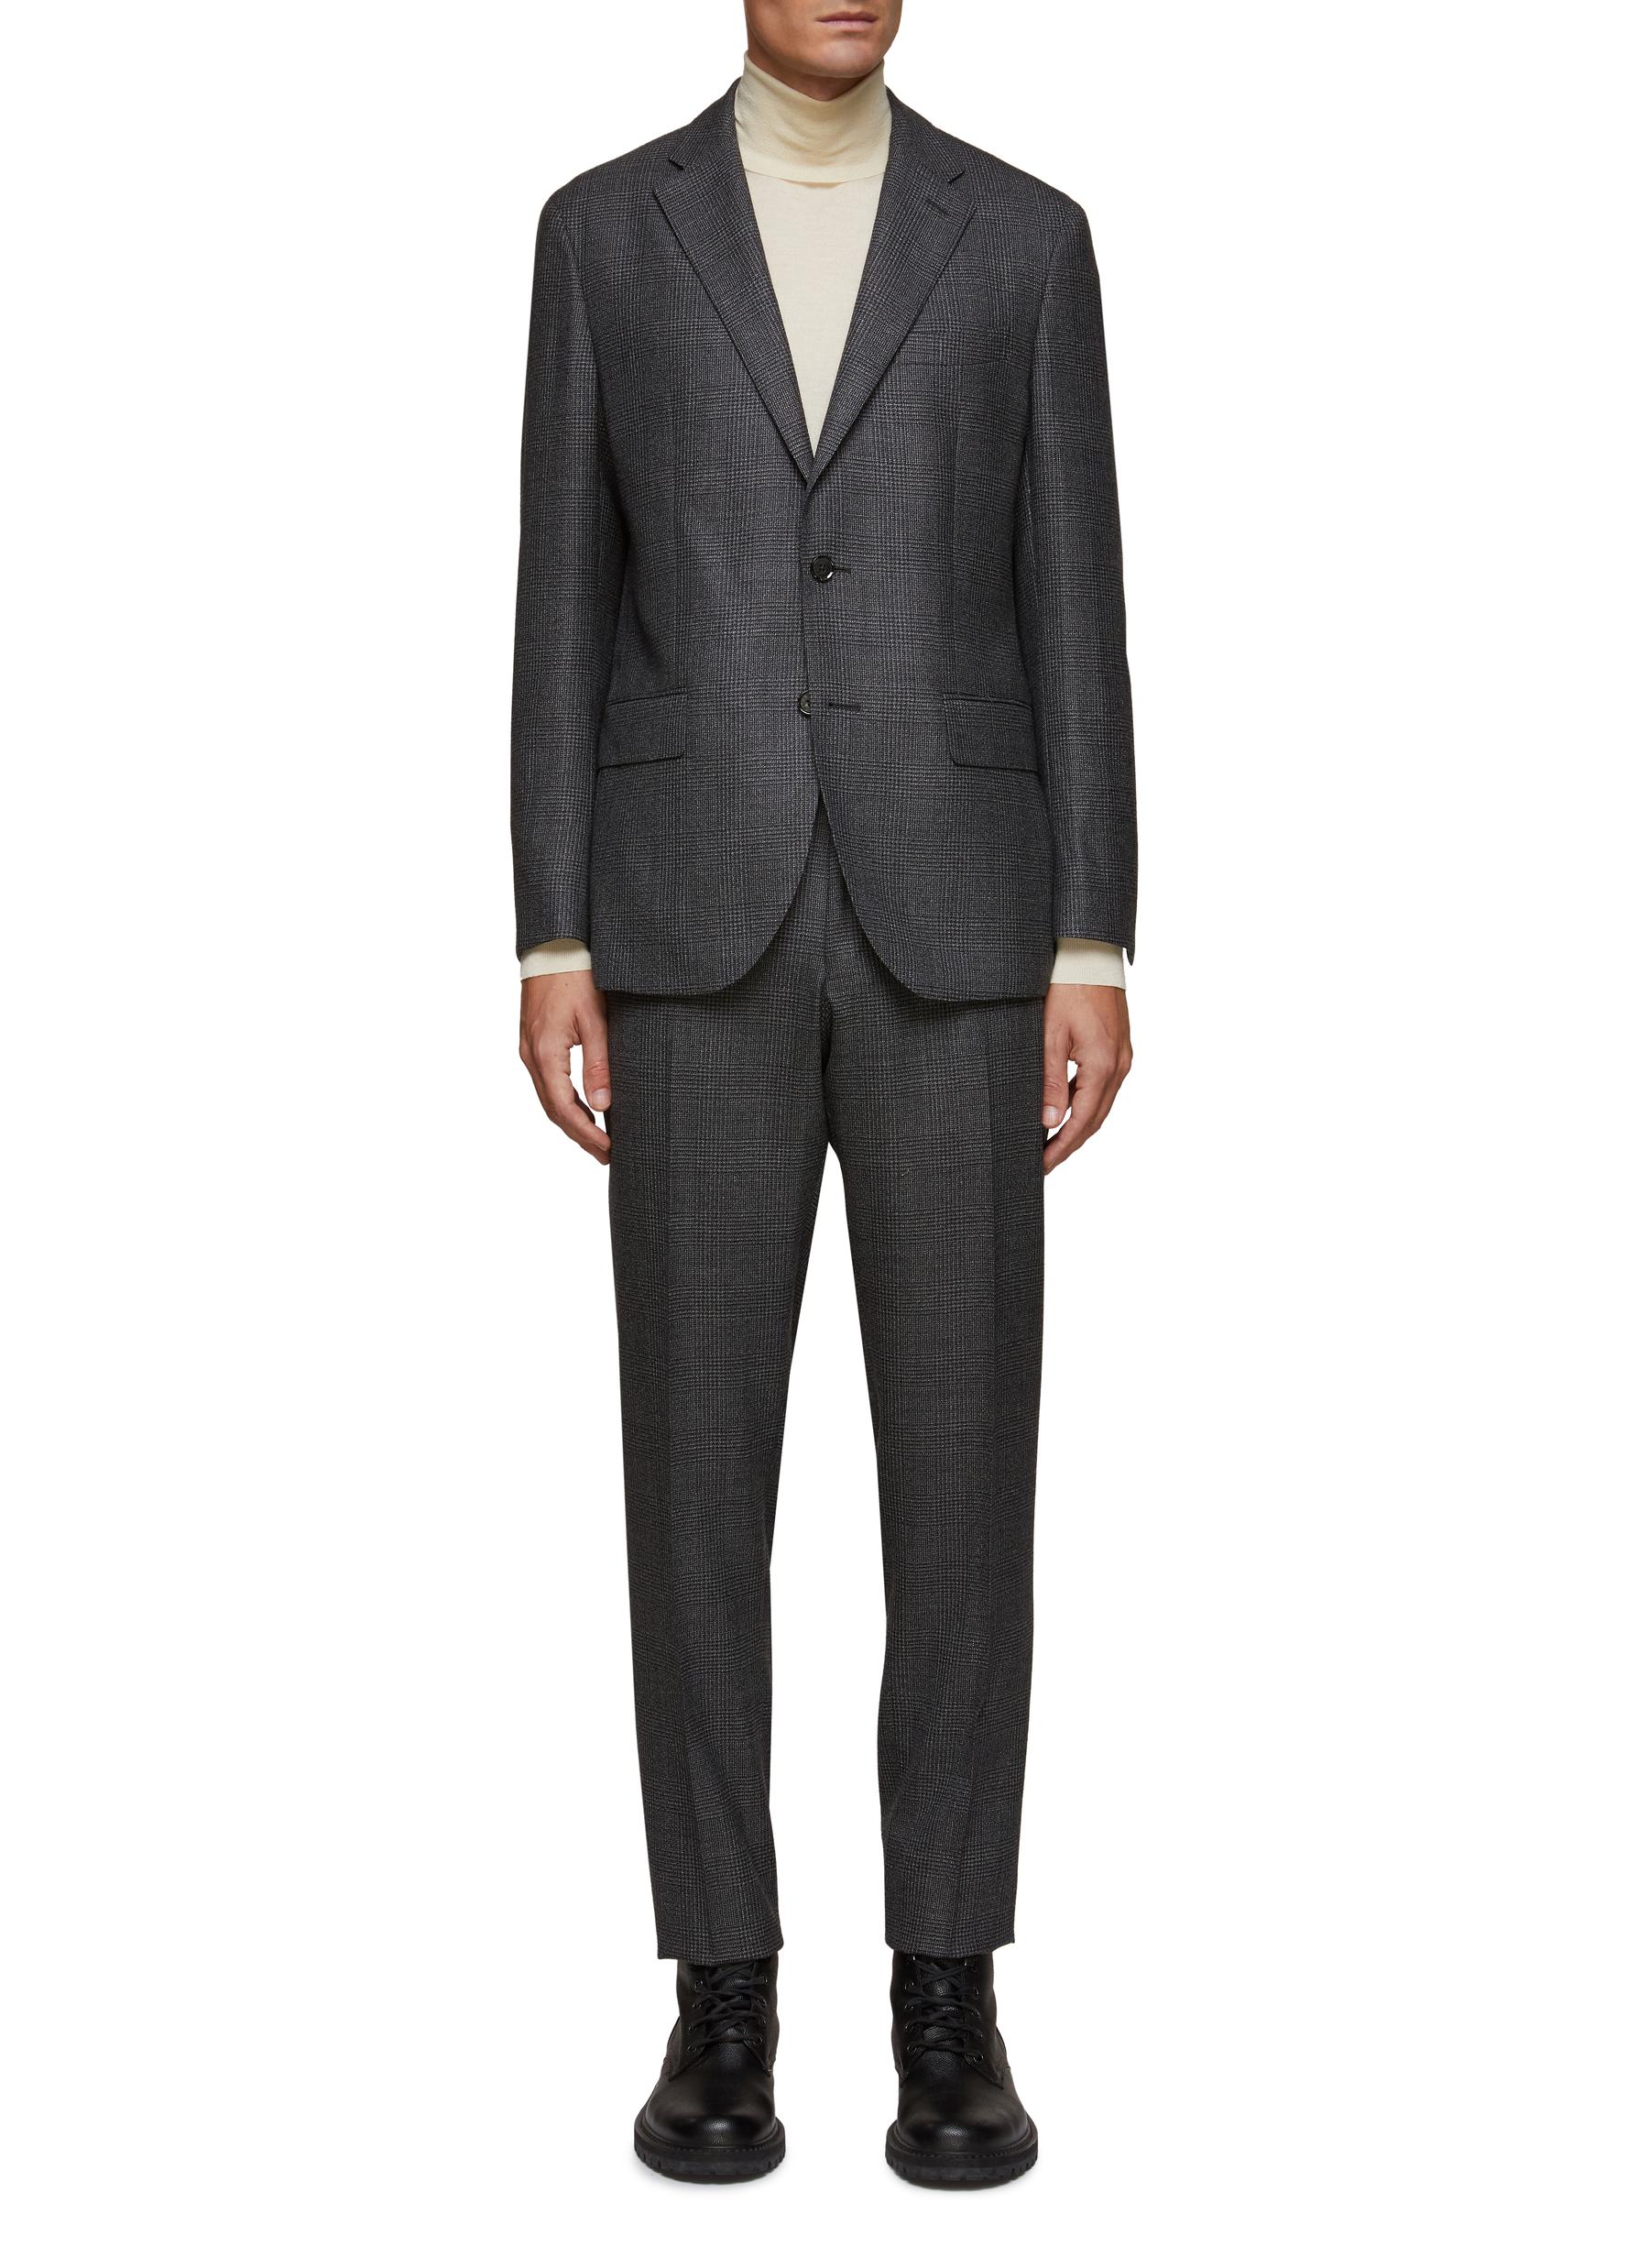 EQUIL SINGLE BREASTED NOTCH LAPEL GLEN PLAID UNLINED SUIT